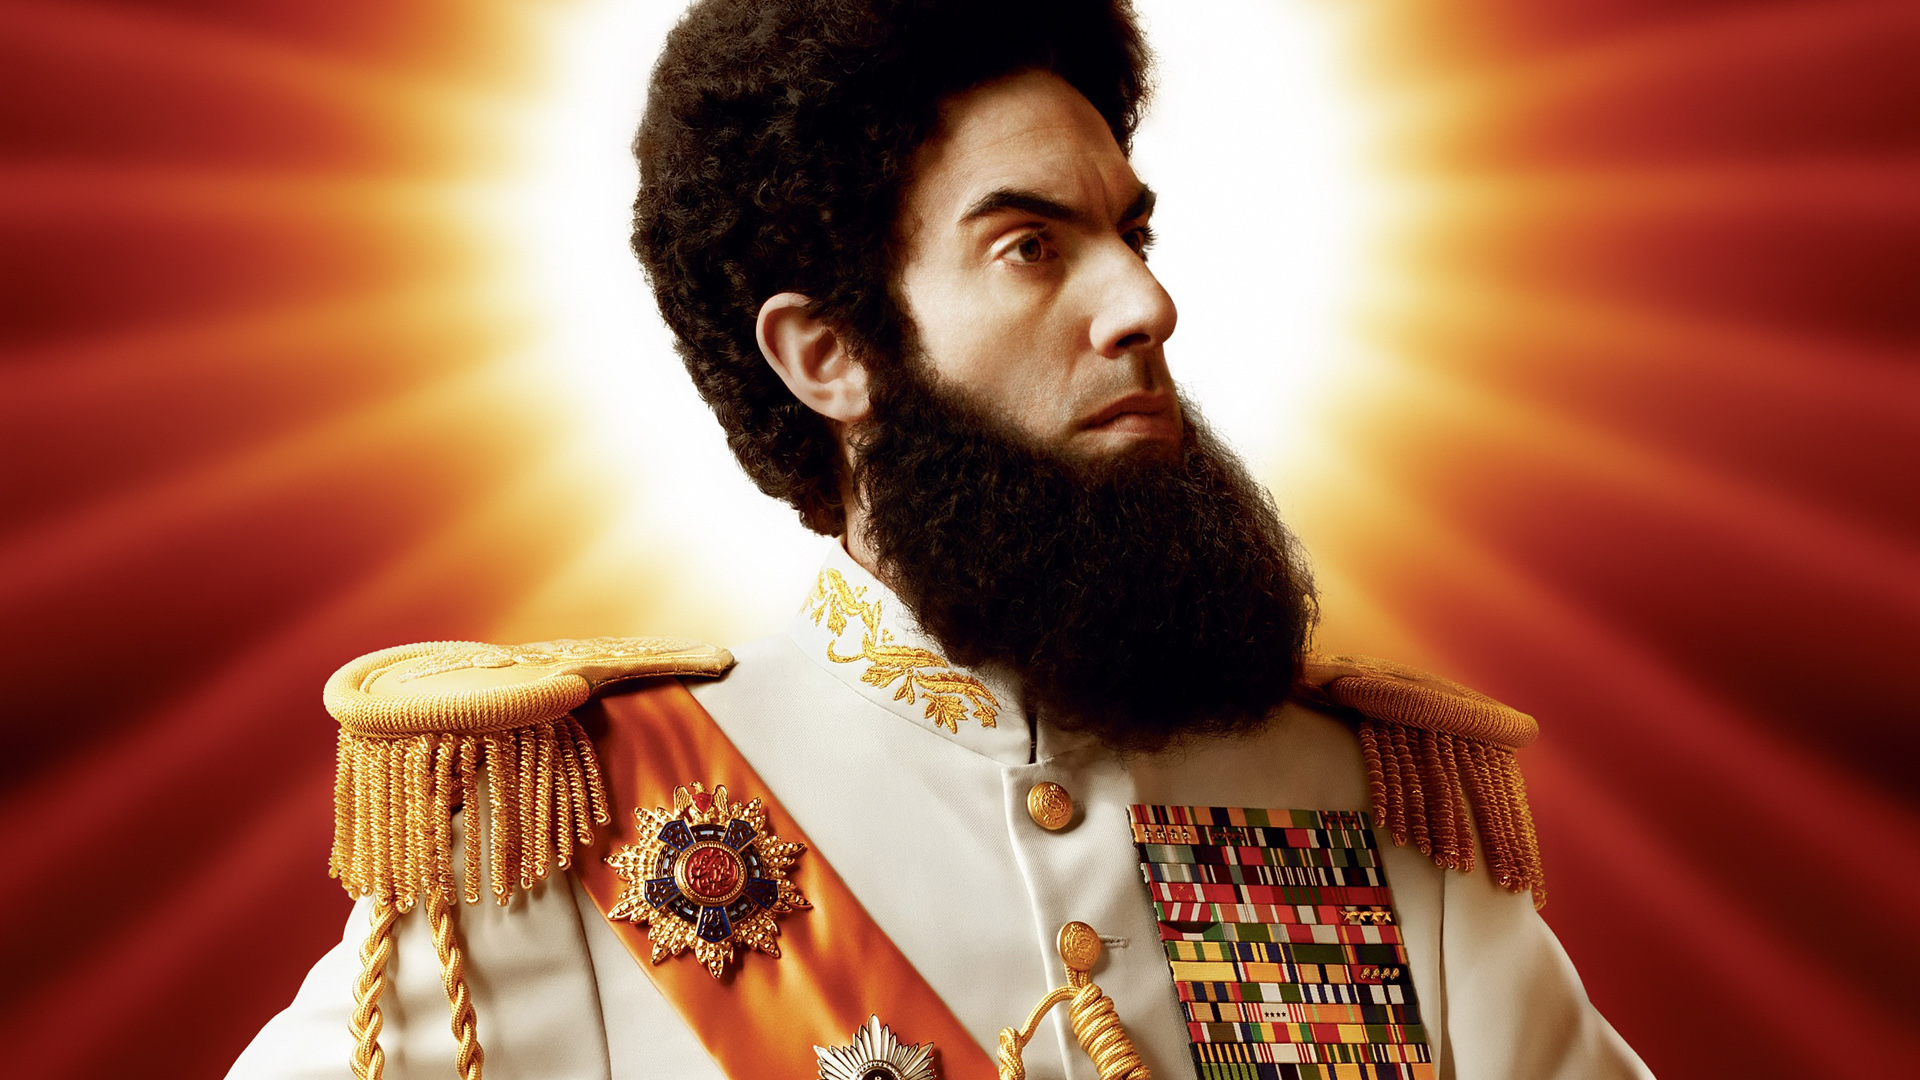 Movie The Dictator HD Wallpaper | Background Image